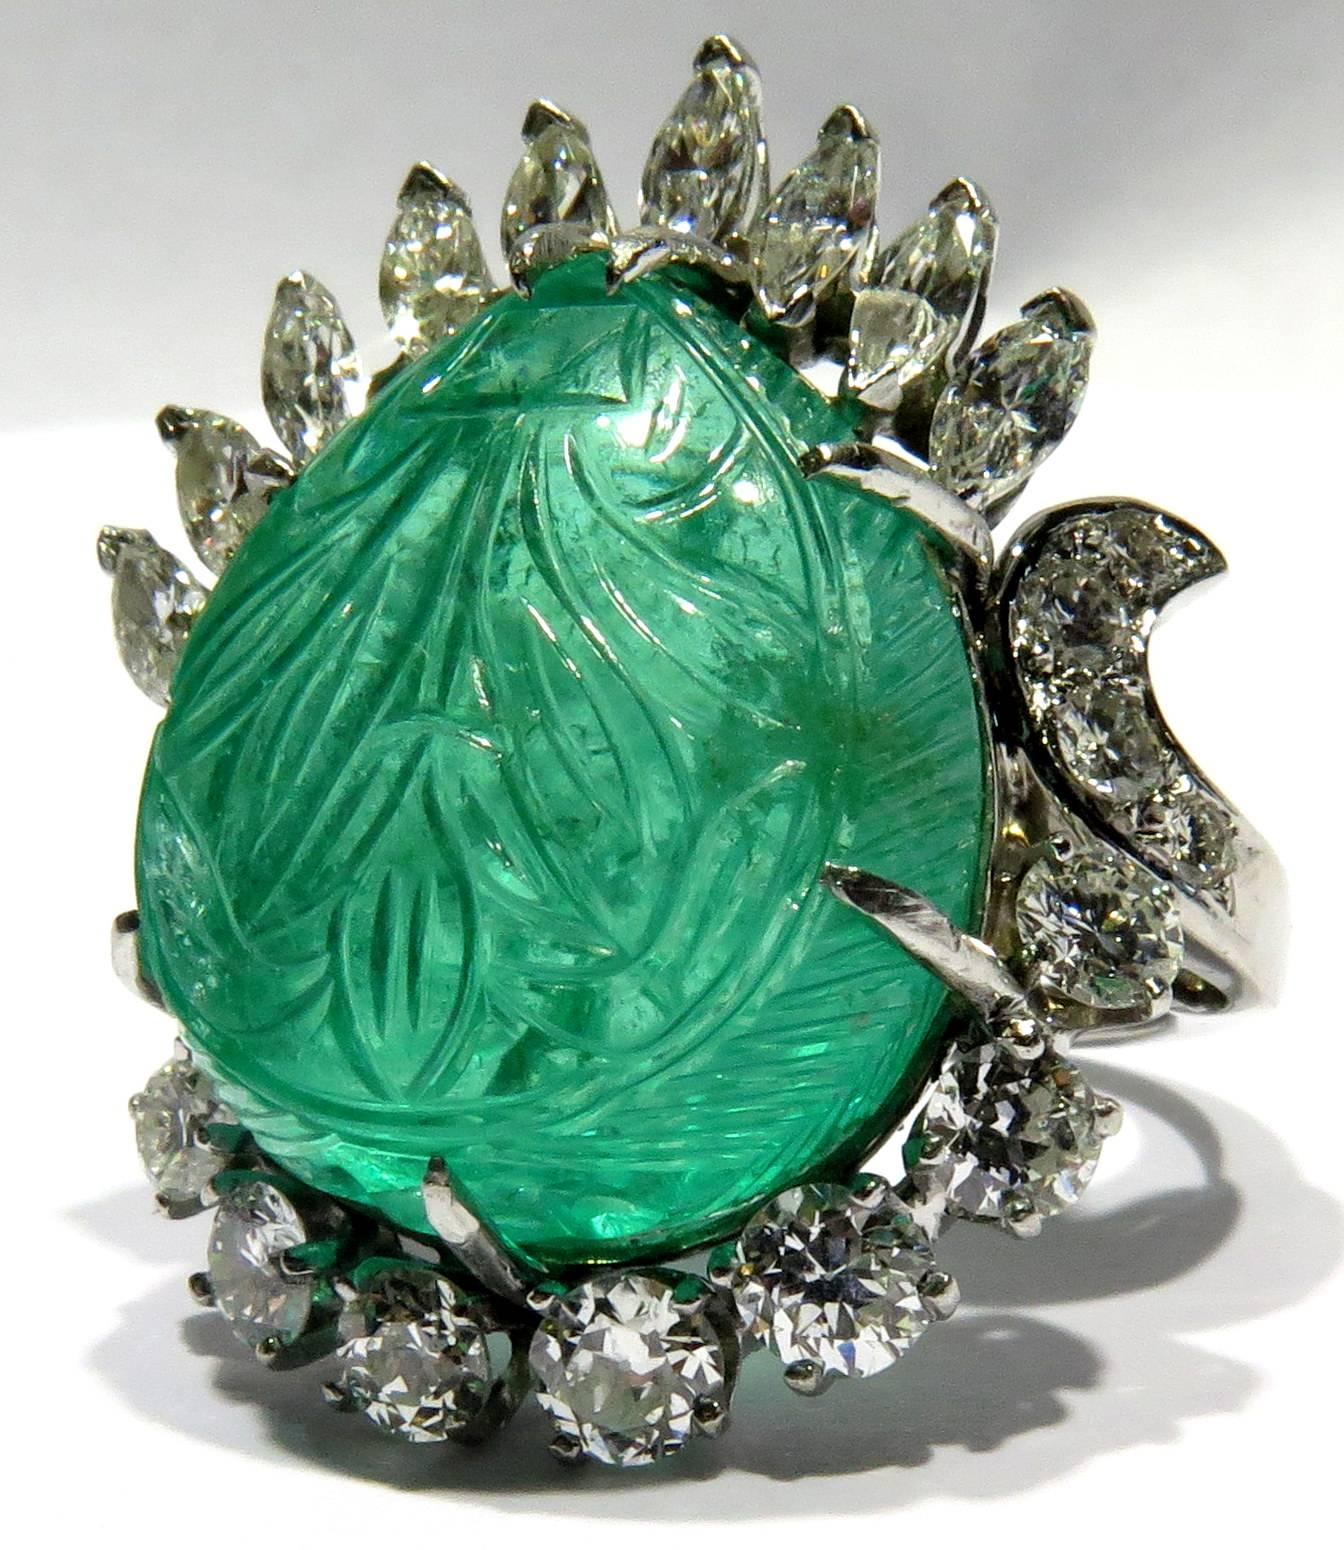 This incredible platinum ring is sure to become your favorite! This amazing flower carved emerald weighs approx 17 carats and is cut in a marquise shape held by 7 prongs. The surrounding diamonds are round and marquise shapes. There are approx 3